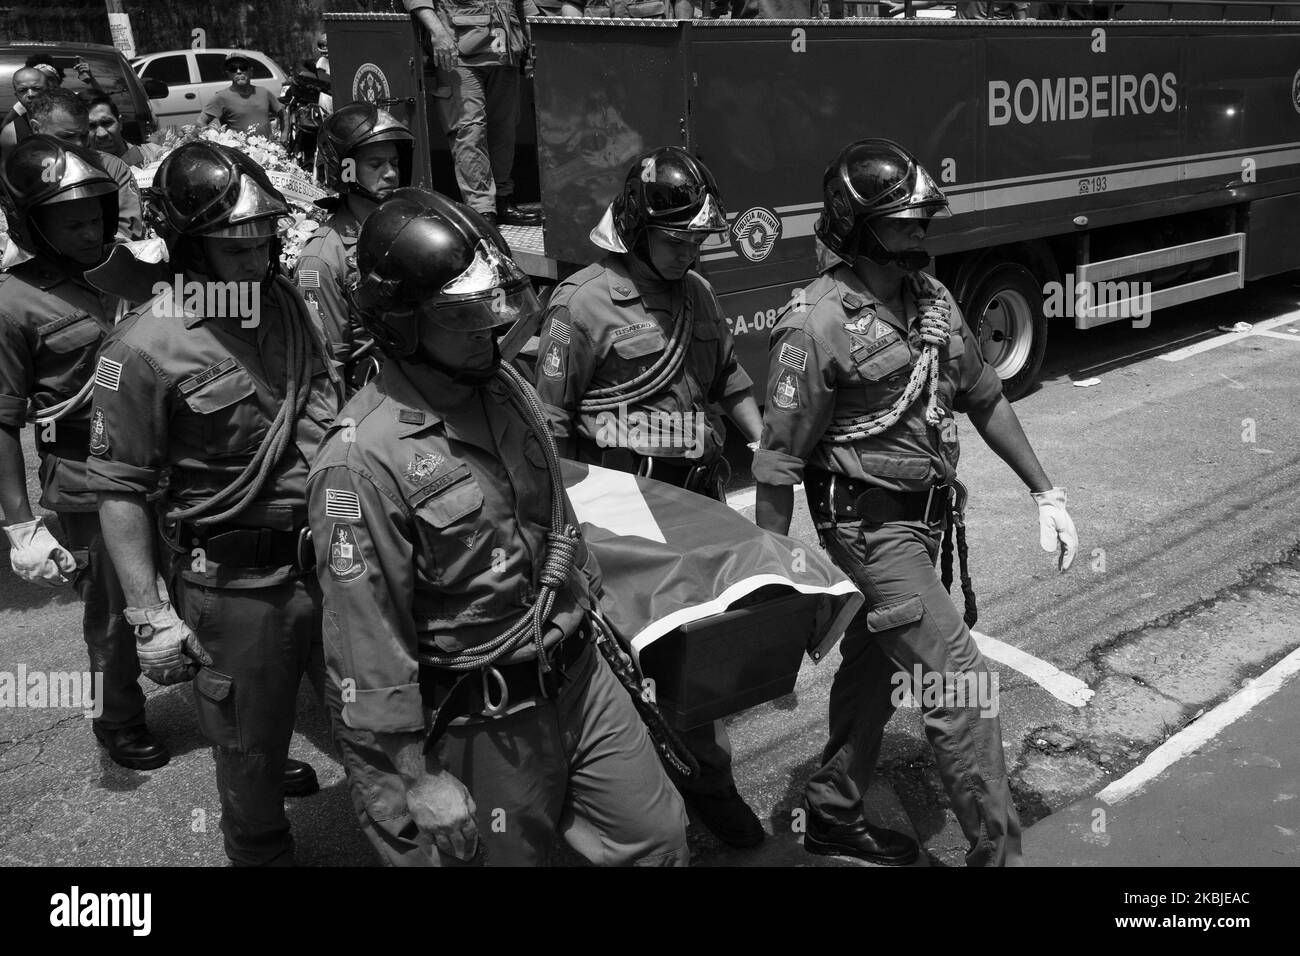 (EDITOR'S NOTE: Image was converted to black and white) Arrival of the firefighter coffin Rogerio de Moraes Santos for his funeral at the Cemiterio Saudade e Funeraria Municipal Vila Julia in Guaruja, Brazil, March 4, 2020. Corporal Moraes died during an operation at Morro do Macaco Pelado in the early hours of Tuesday, March 3, 2020. (Photo by Felipe Beltrame/NurPhoto) Stock Photo